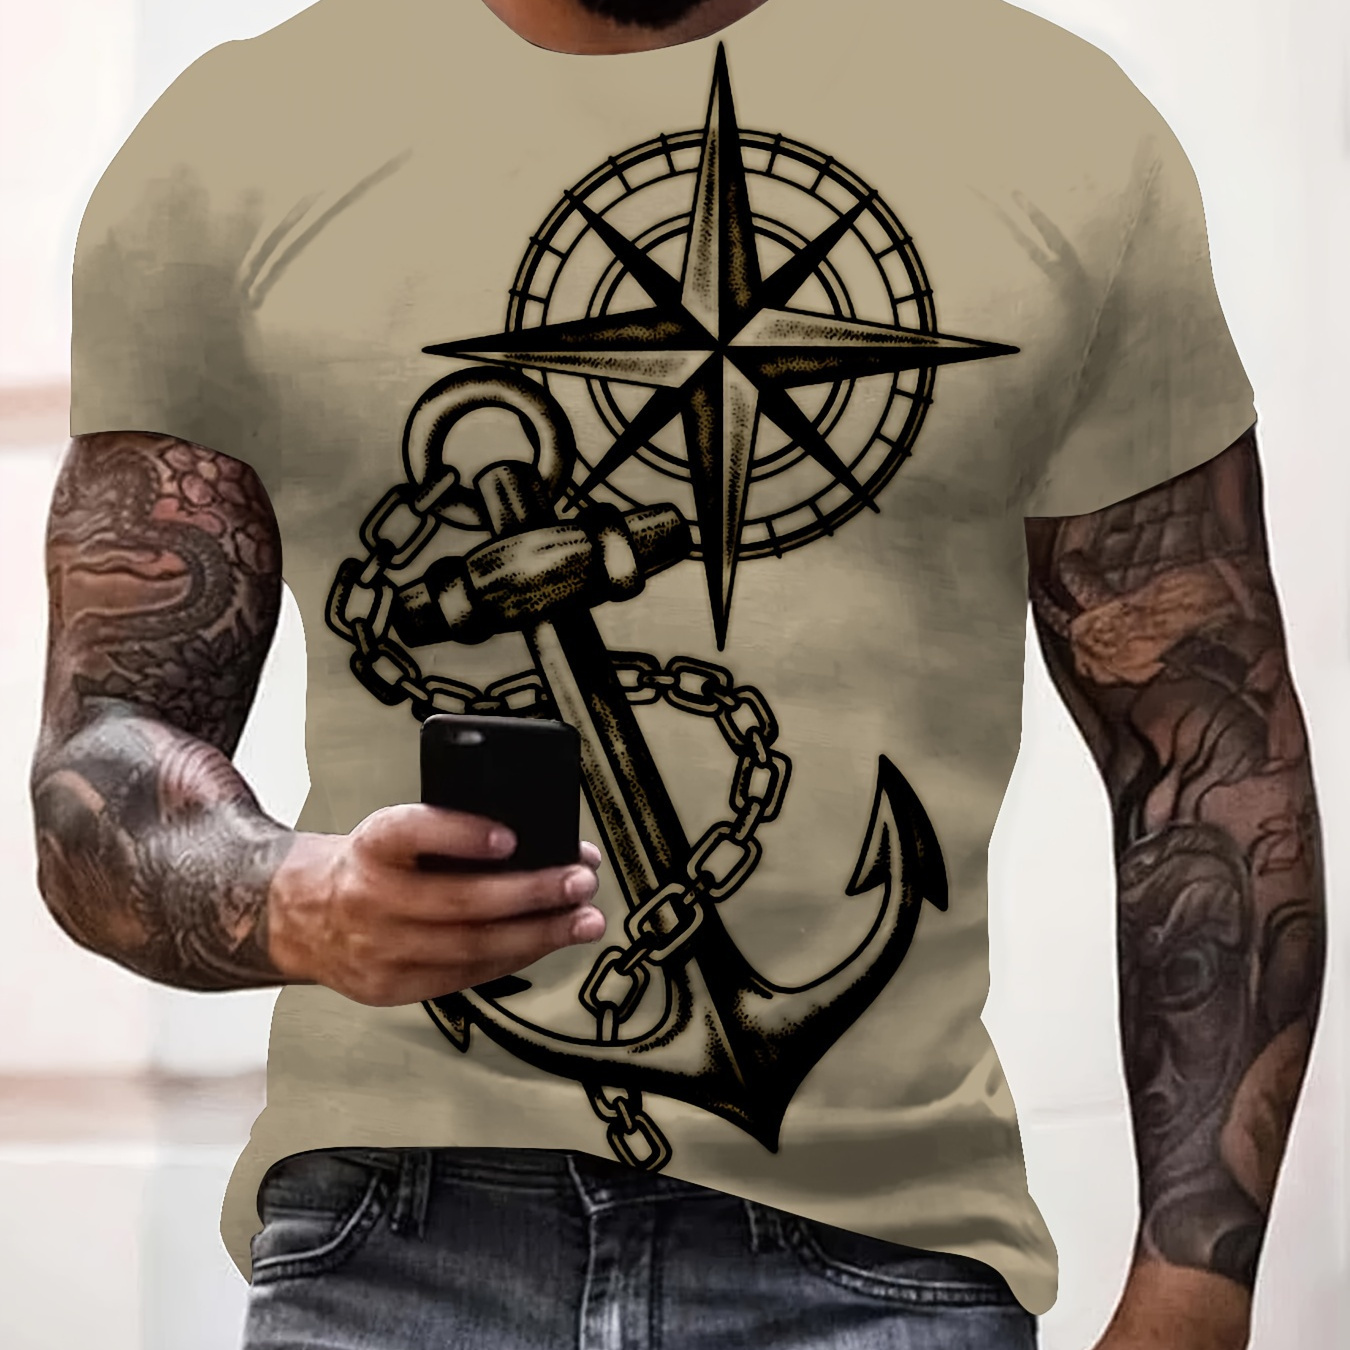 

Compass And Anchor Print Men's Stylish Short Sleeve Crew Neck T-shirt, Summer Outdoor